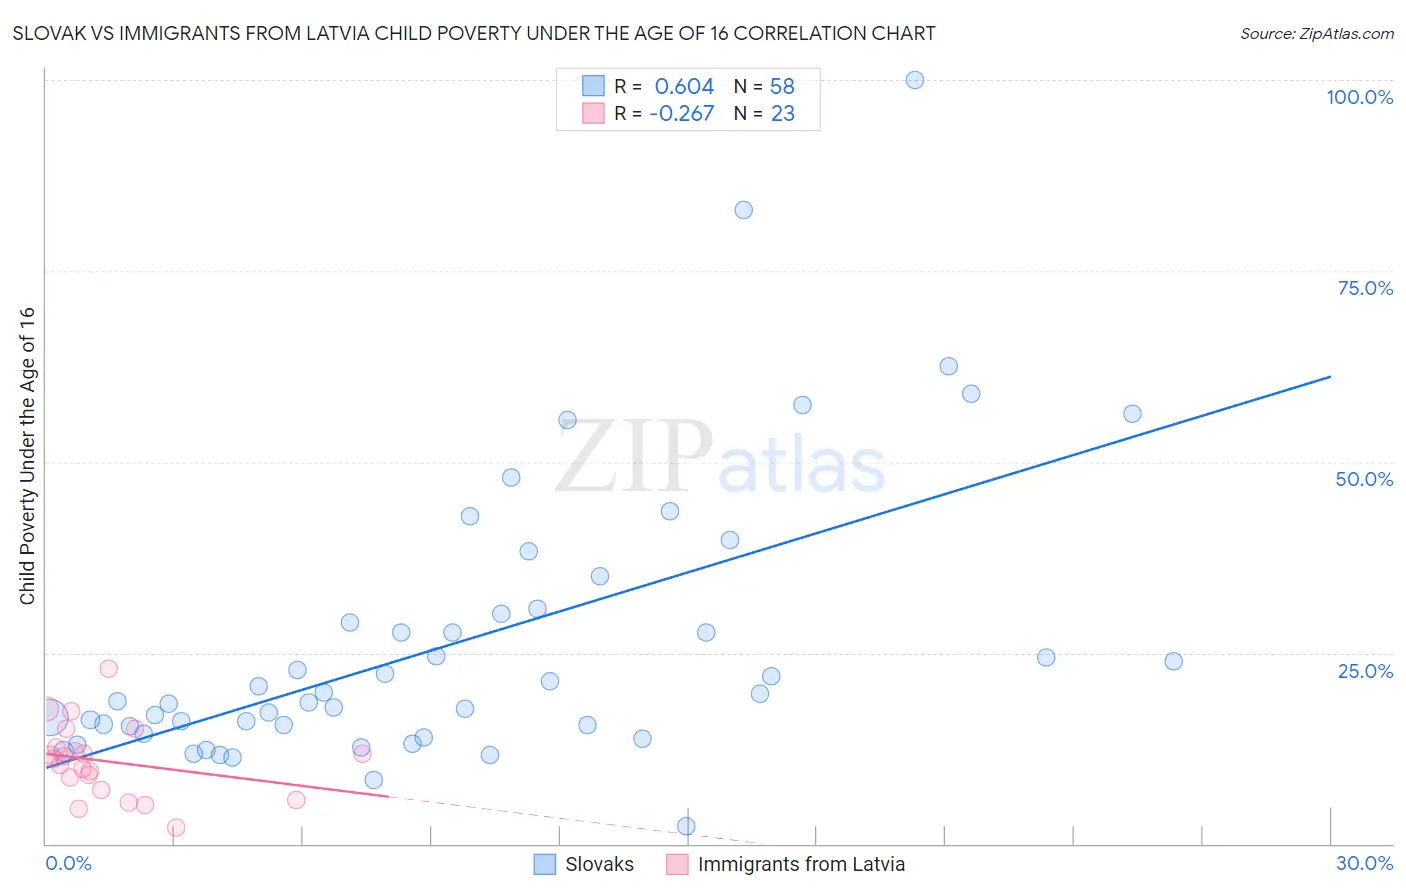 Slovak vs Immigrants from Latvia Child Poverty Under the Age of 16